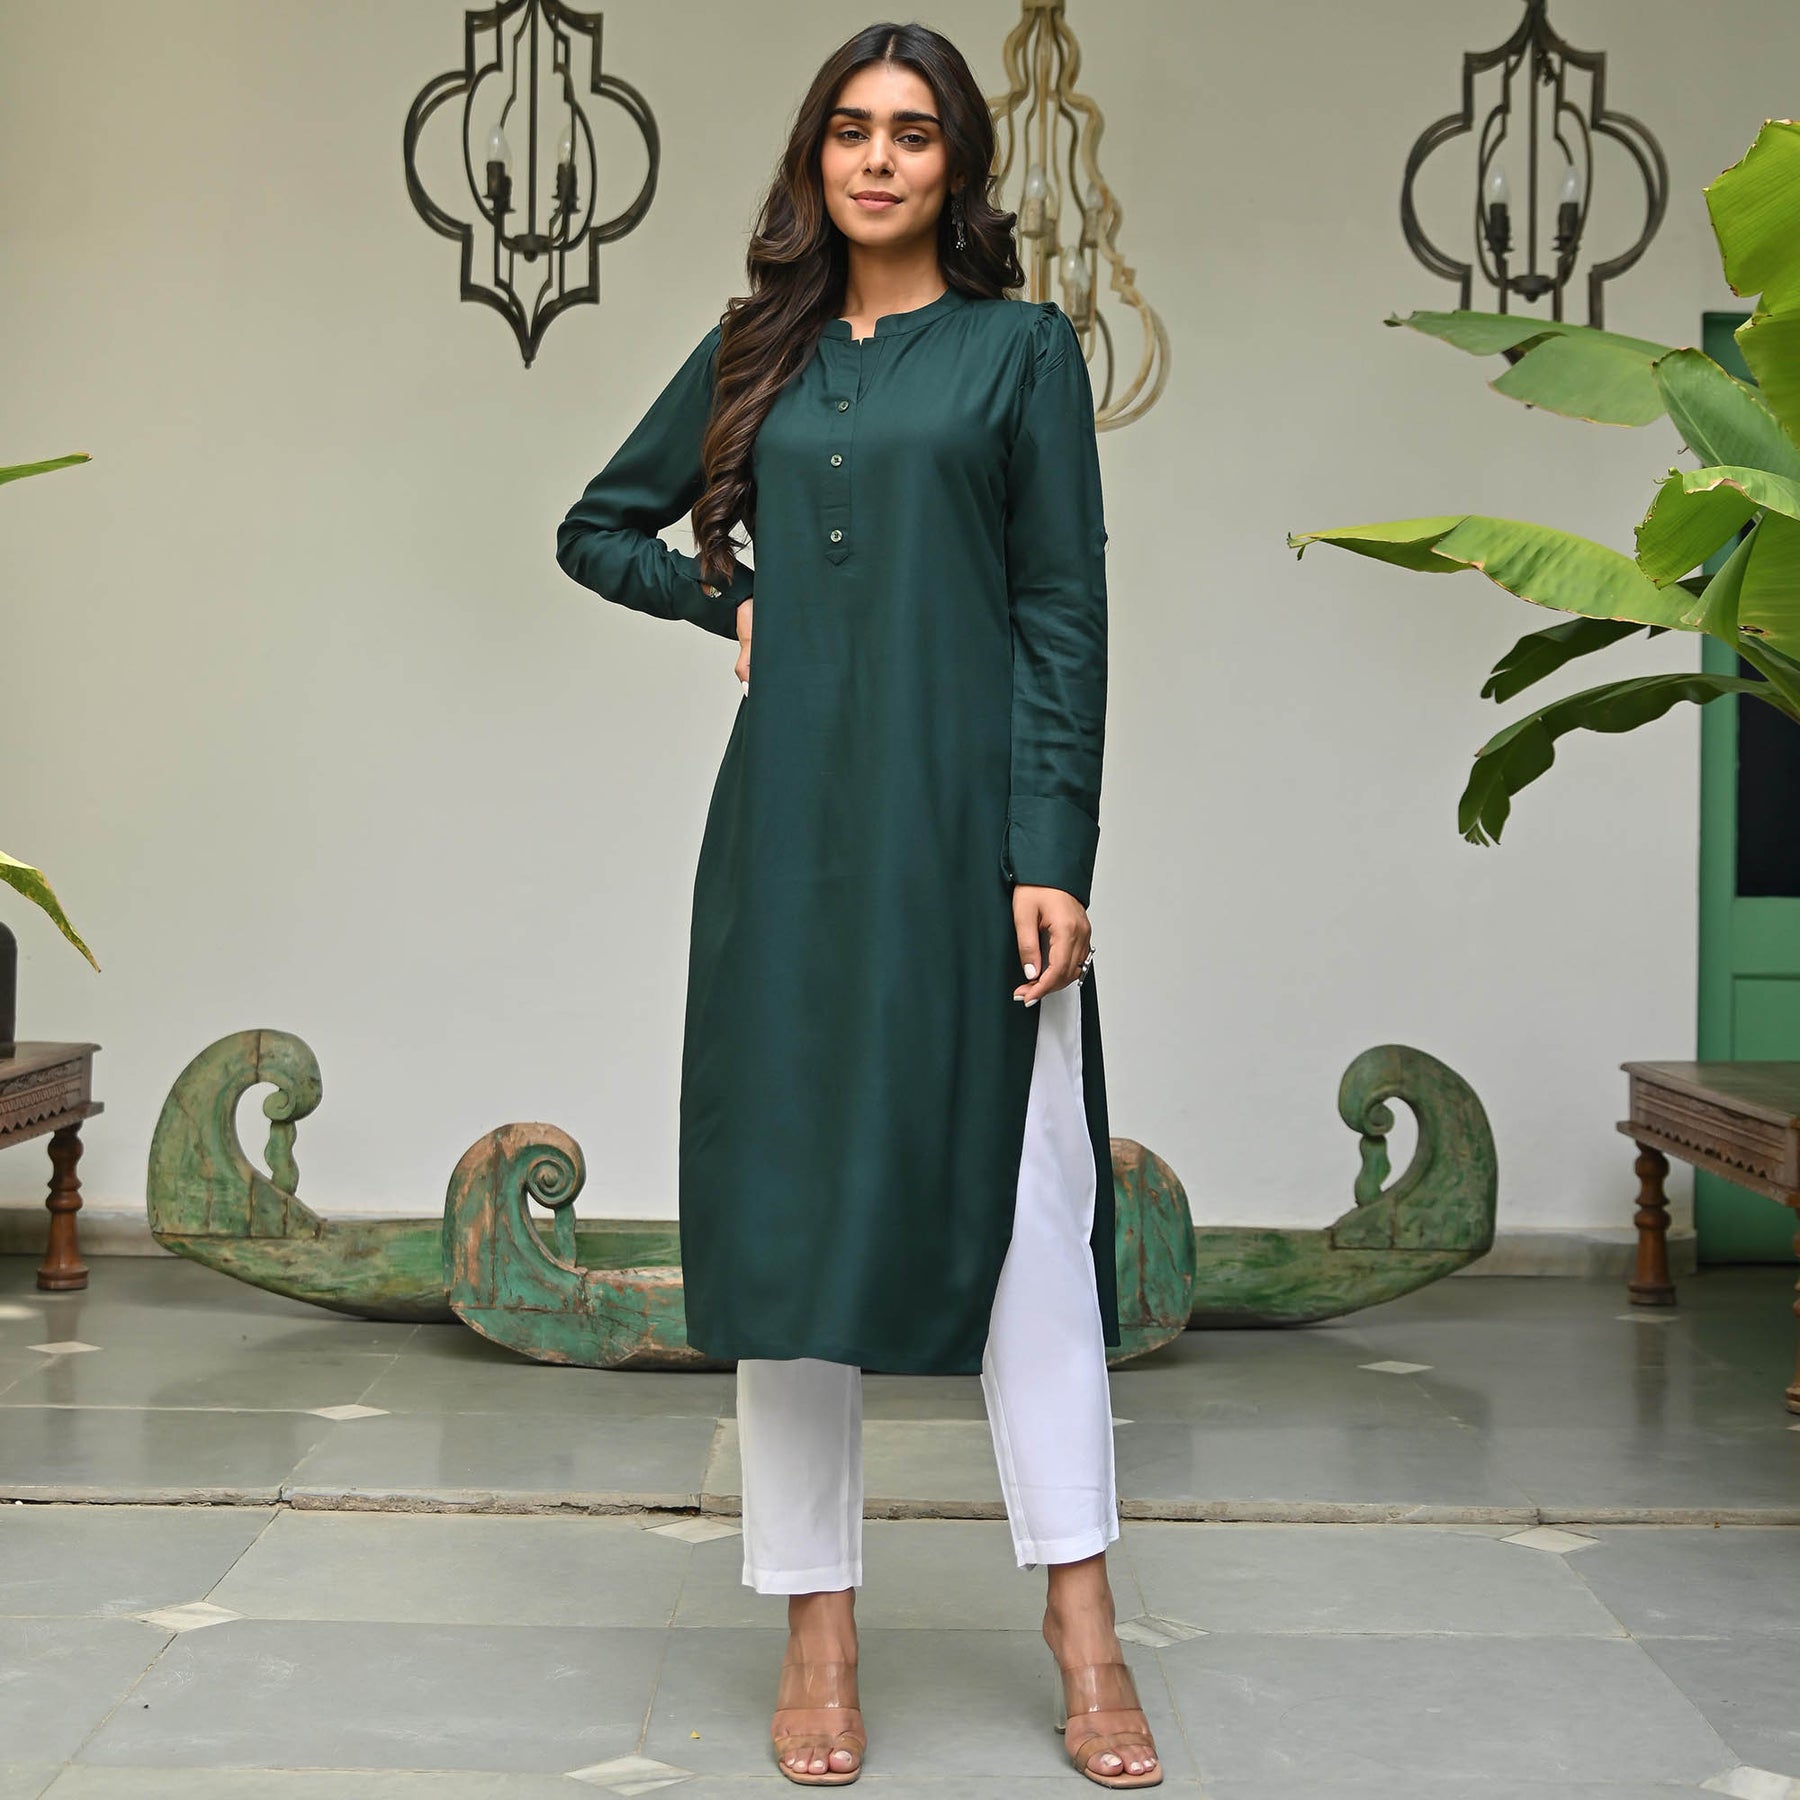 Top and Shorts Set Nightwear, Short kurti tops for jeans, cotton short kurti  for woman, – Kantha India